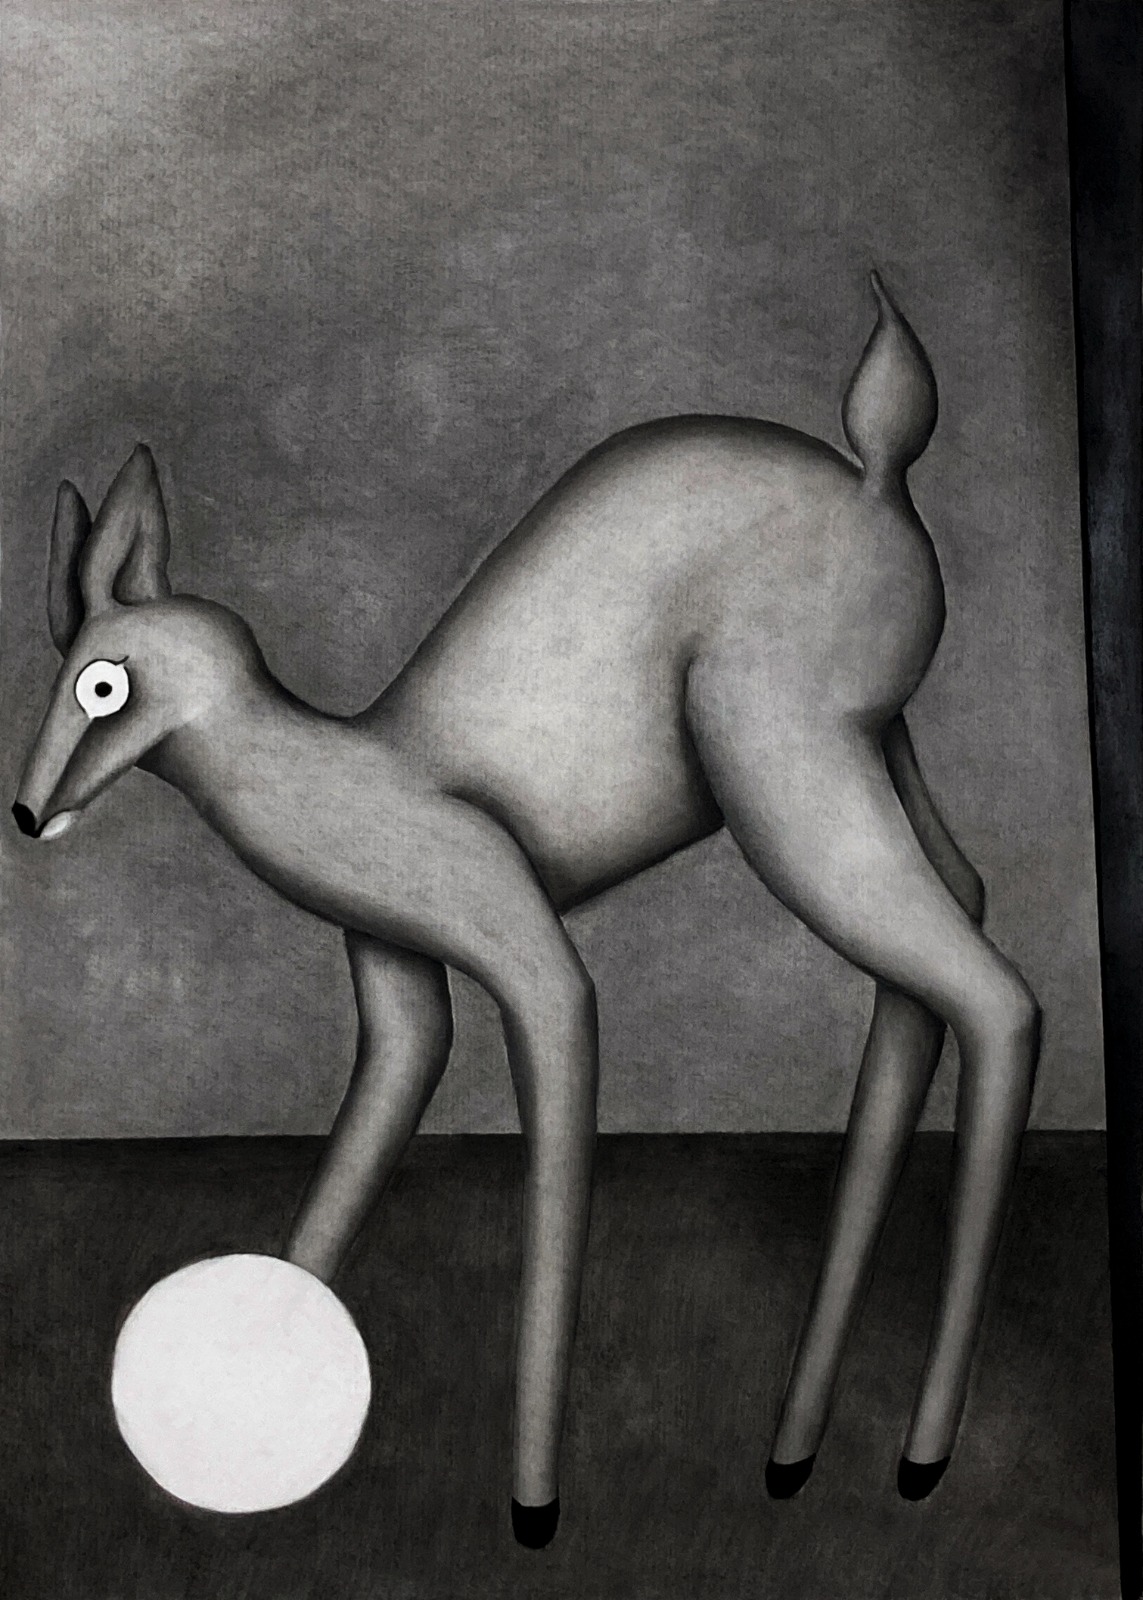 Liz Marr
"Childhood"
2021
Charcoal on Fabriano Paper
75x103 cm